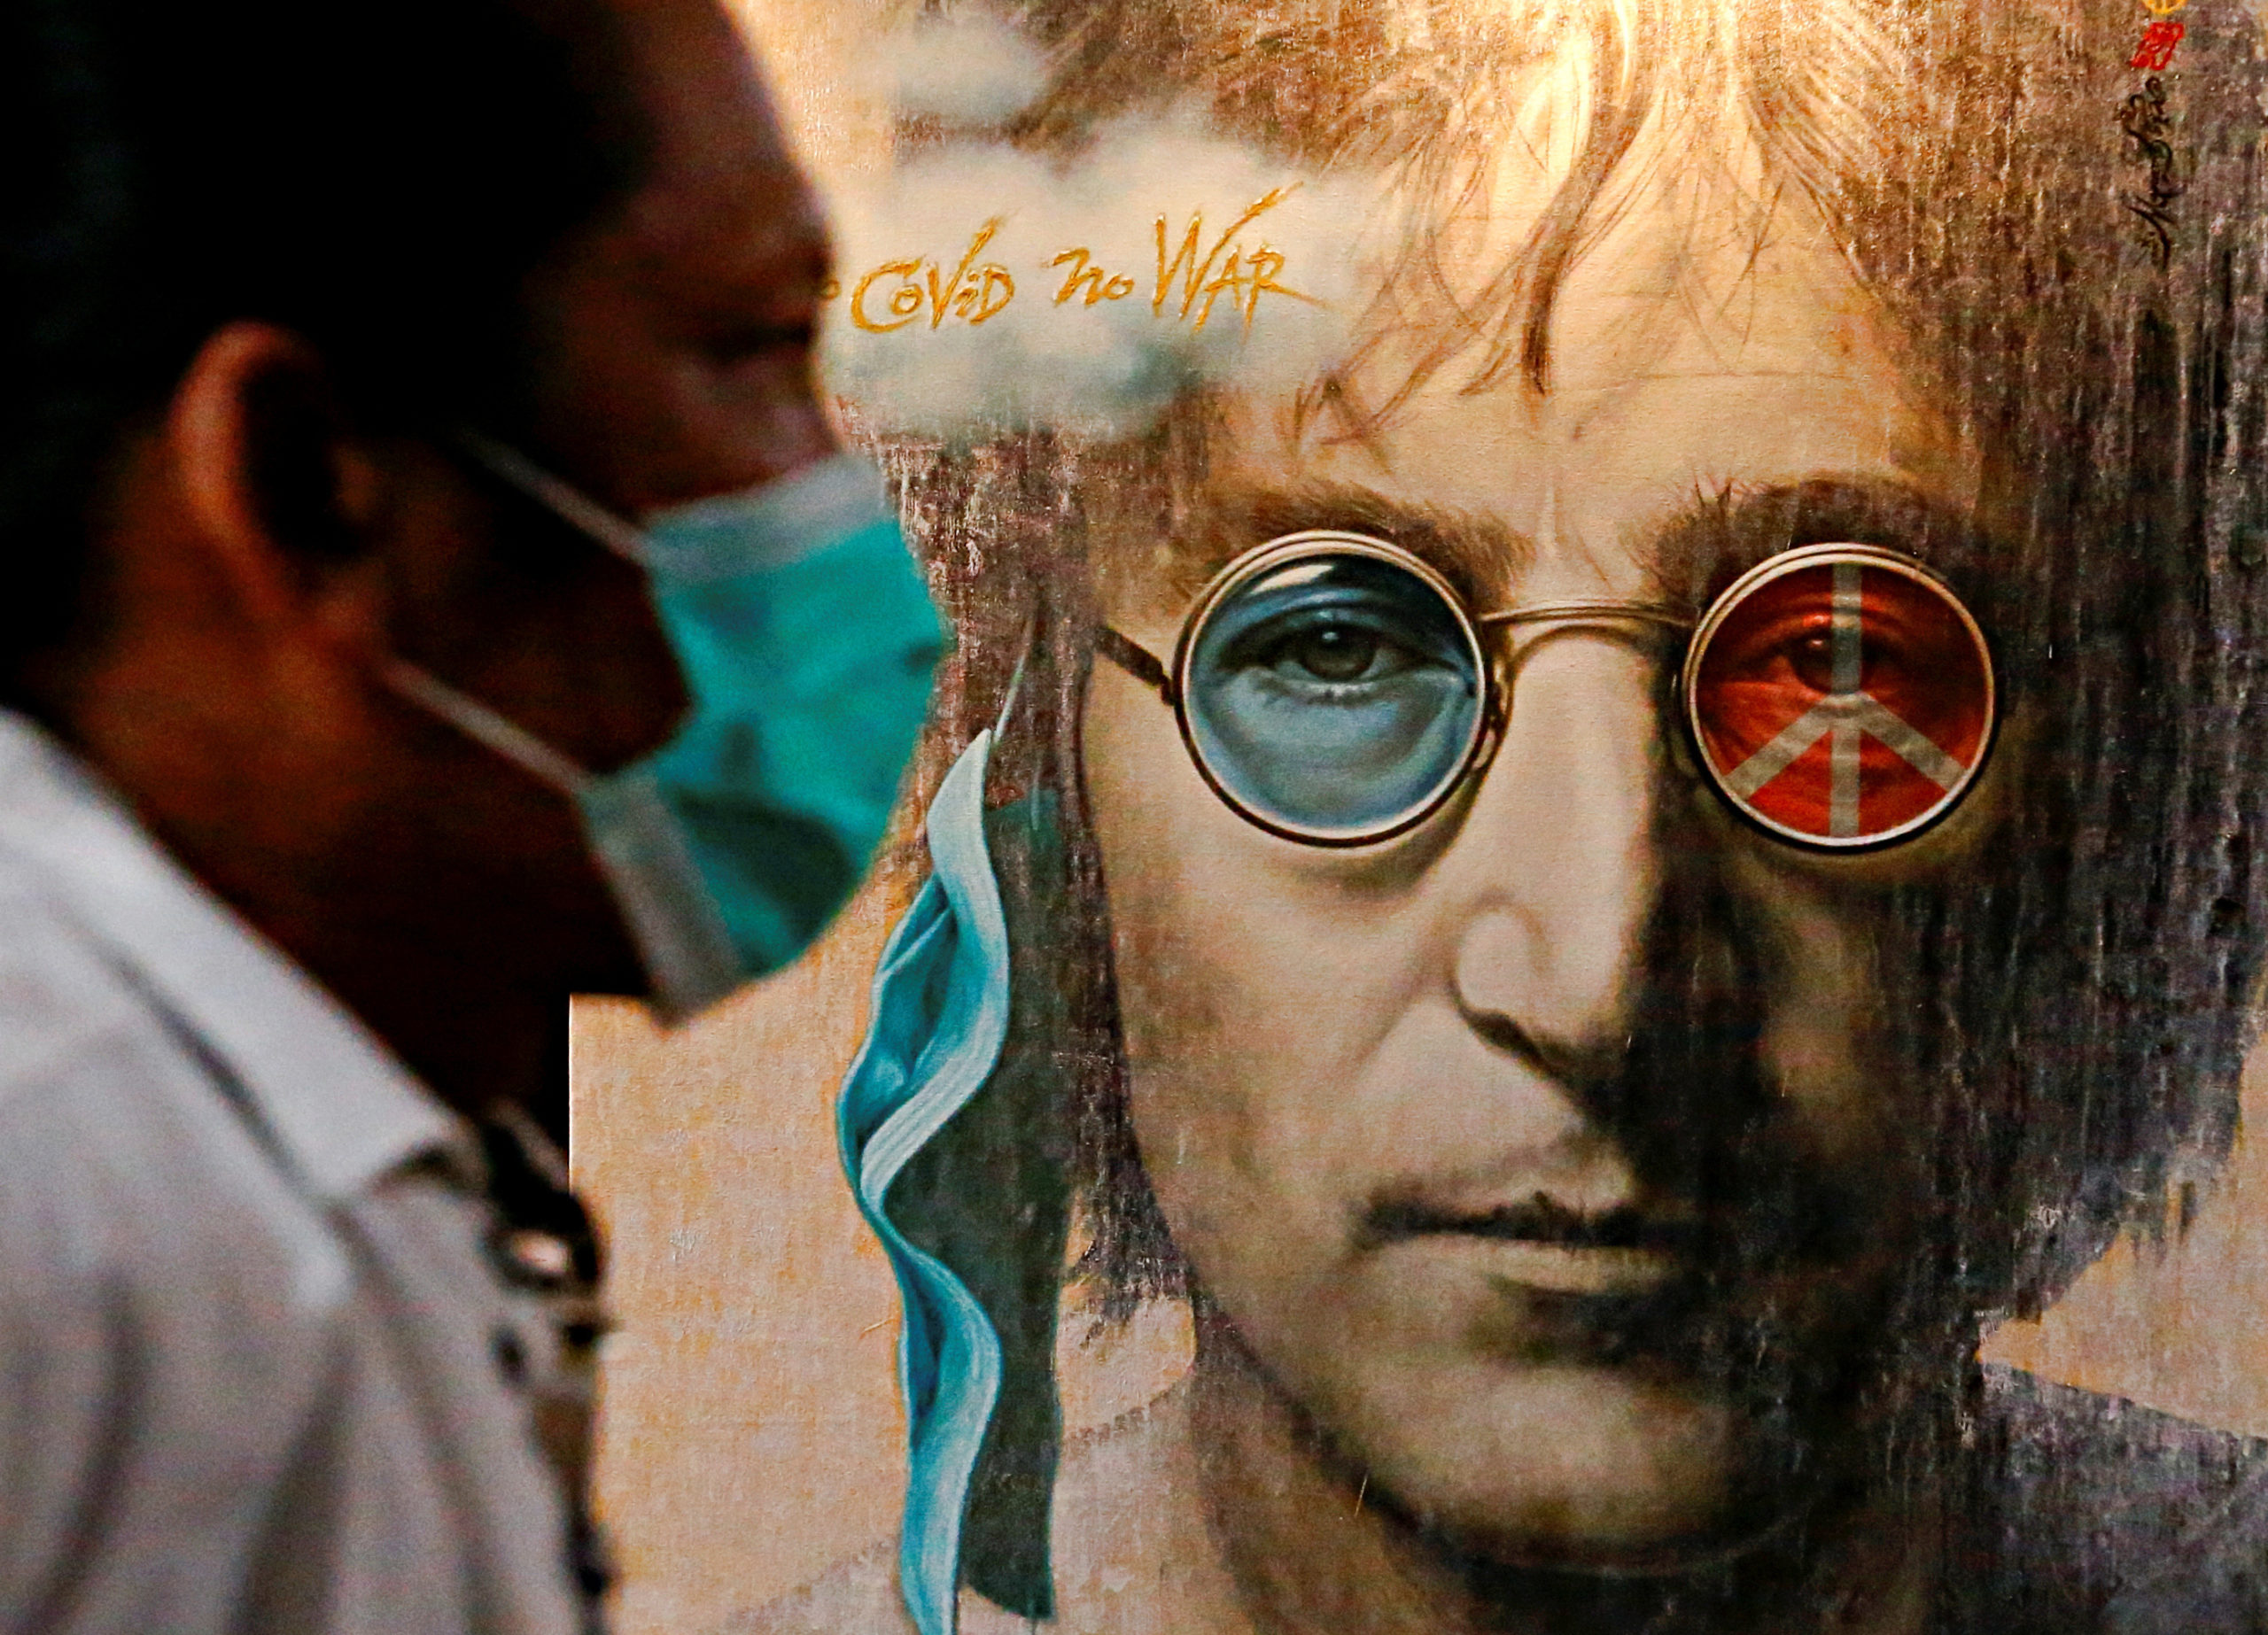 A visitor wearing a protective face mask walks past painted art depicting John Lennon during an exhibition, amid the coronavirus disease (COVID-19) outbreak, in Jakarta, Indonesia, October 15, 2020. REUTERS/Ajeng Dinar Ulfiana/File Photo